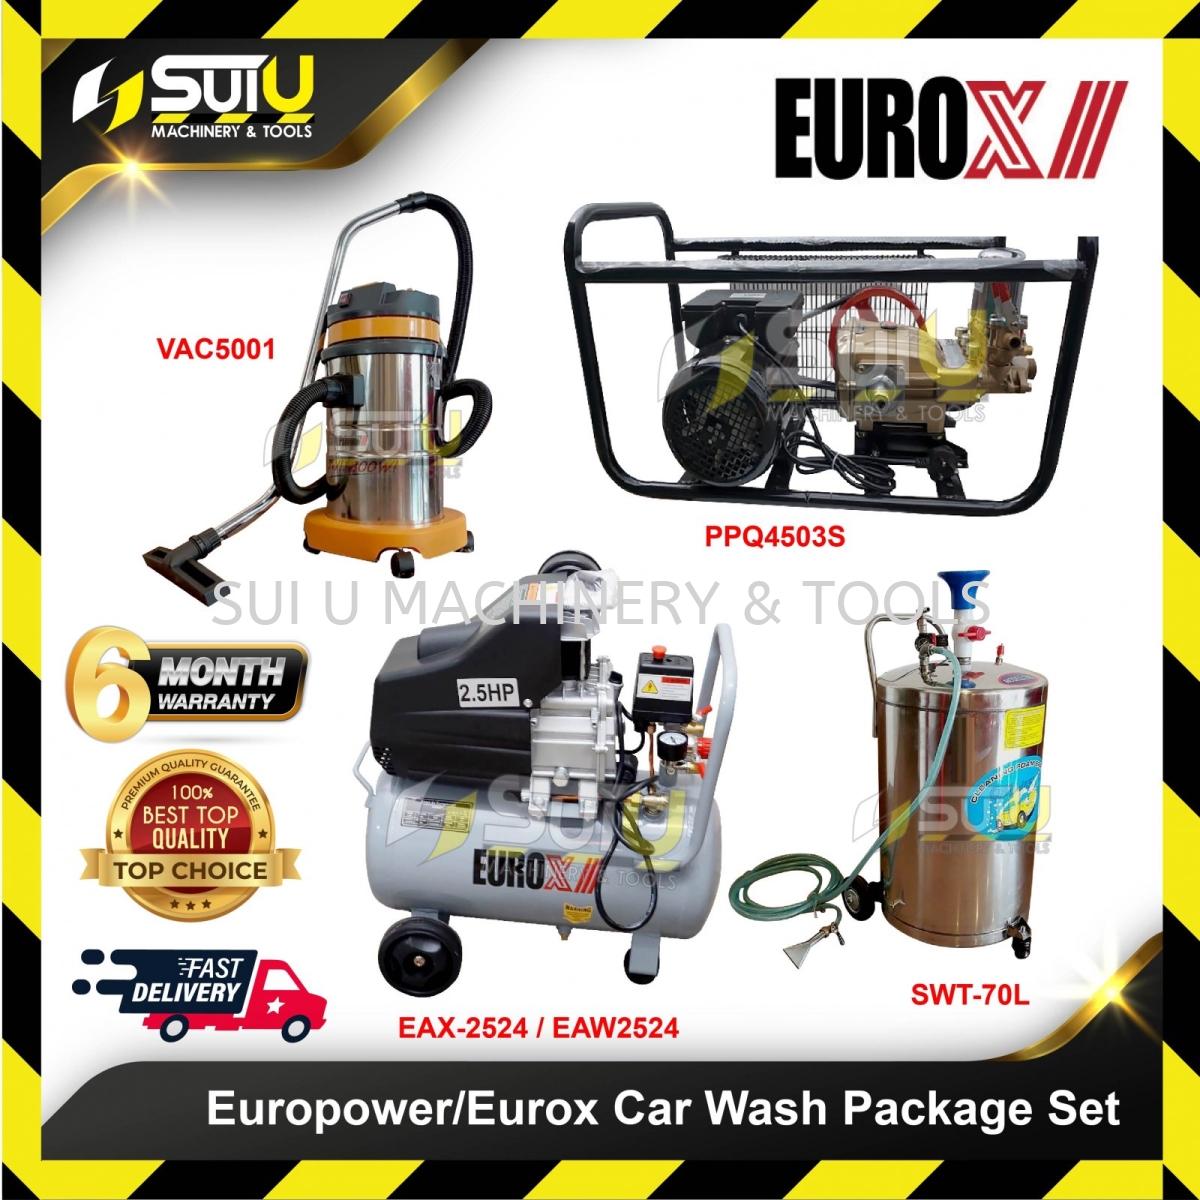 Carwash Business Tools And Equipment For Car Wash, 58% OFF